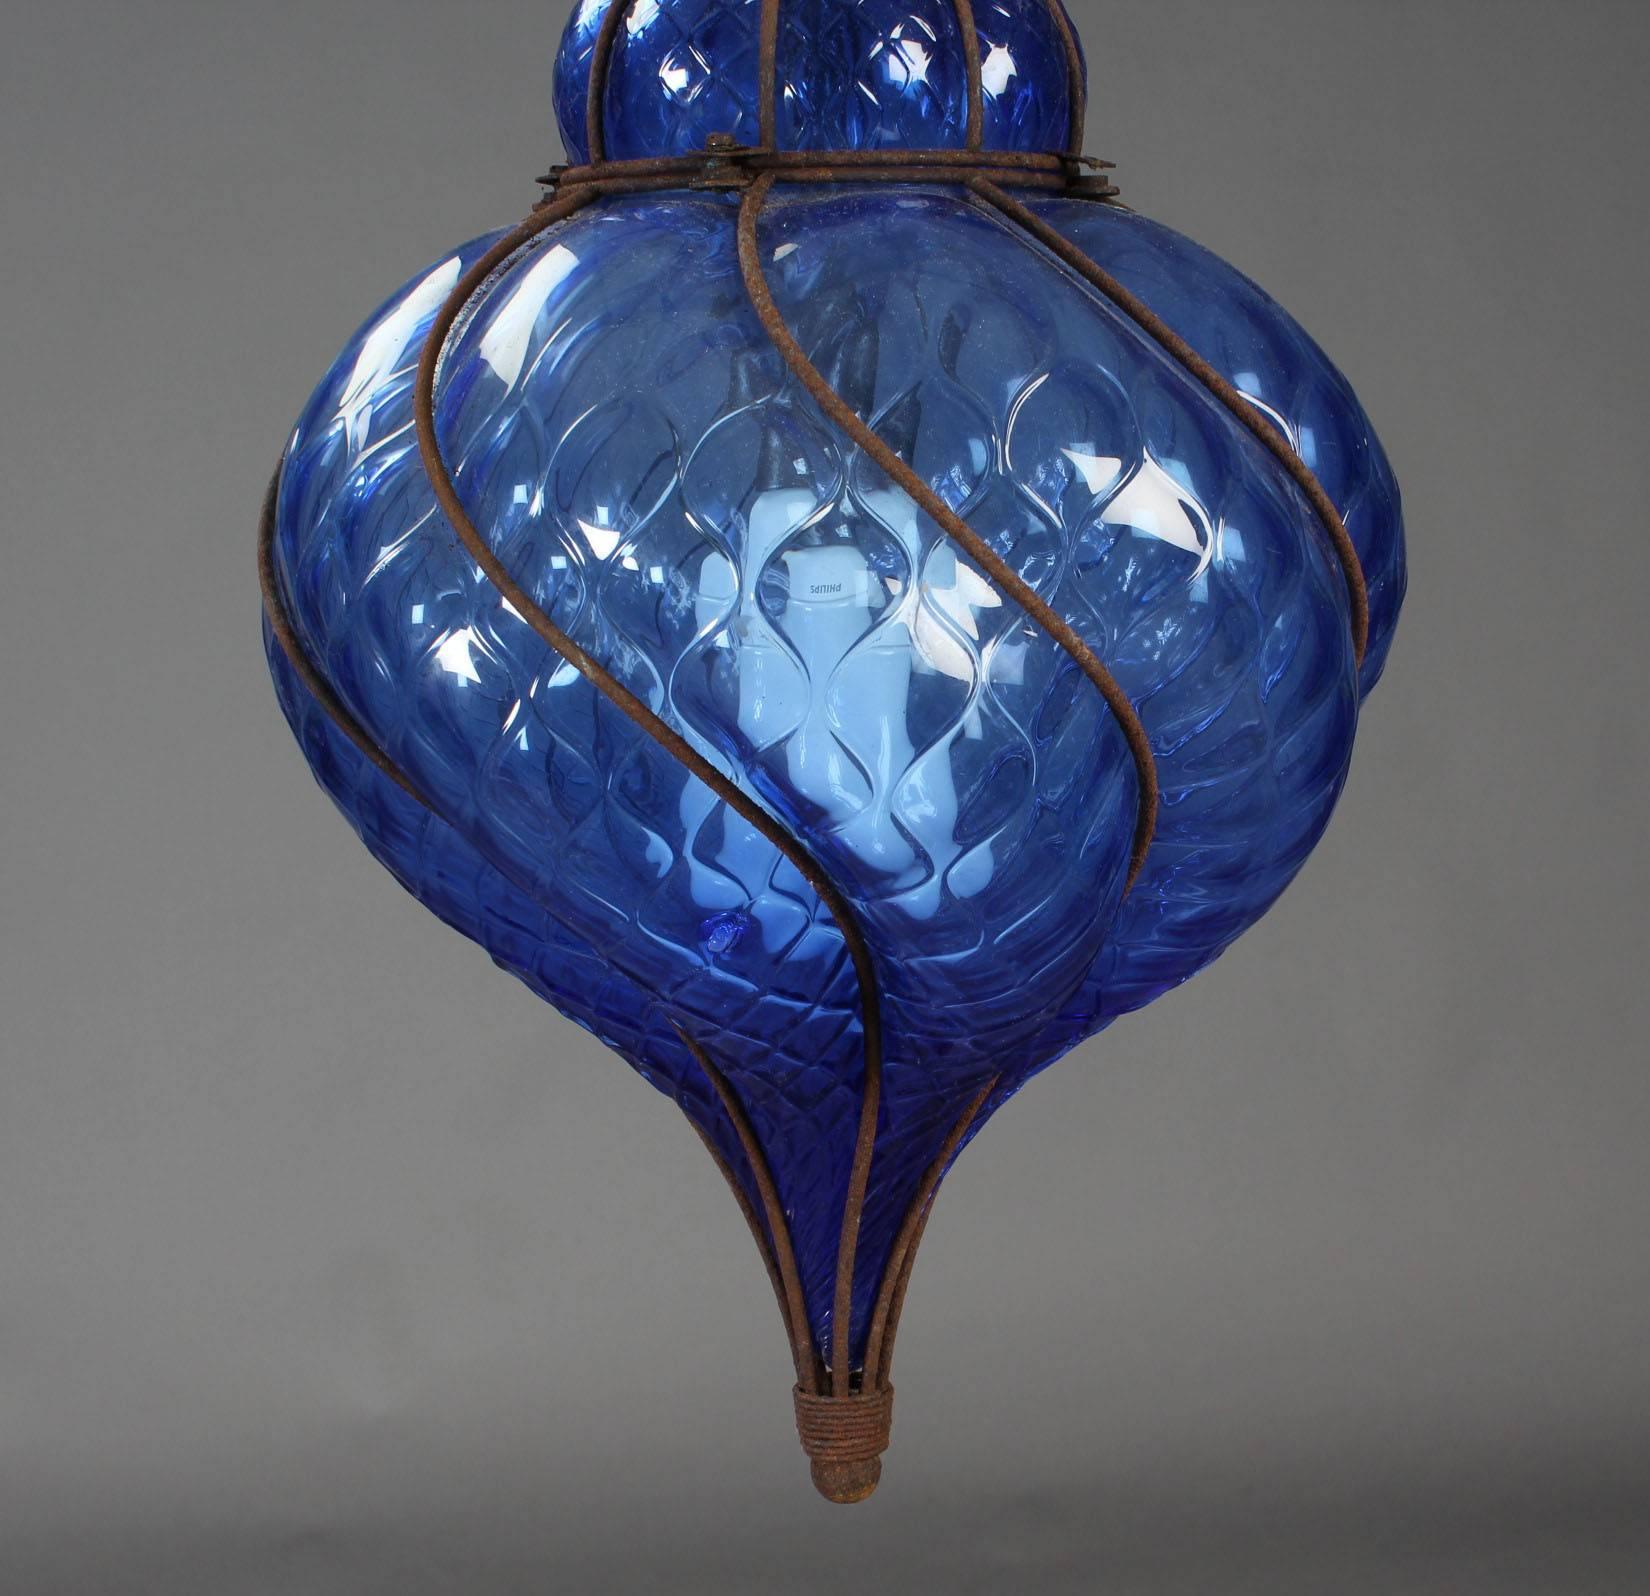 Beautiful Italian Murano glass pendant manufactured by Seguso in the 1950s. It is made from handblown antique cobalt glass with a steel cage.
Measurements: Height 17.71